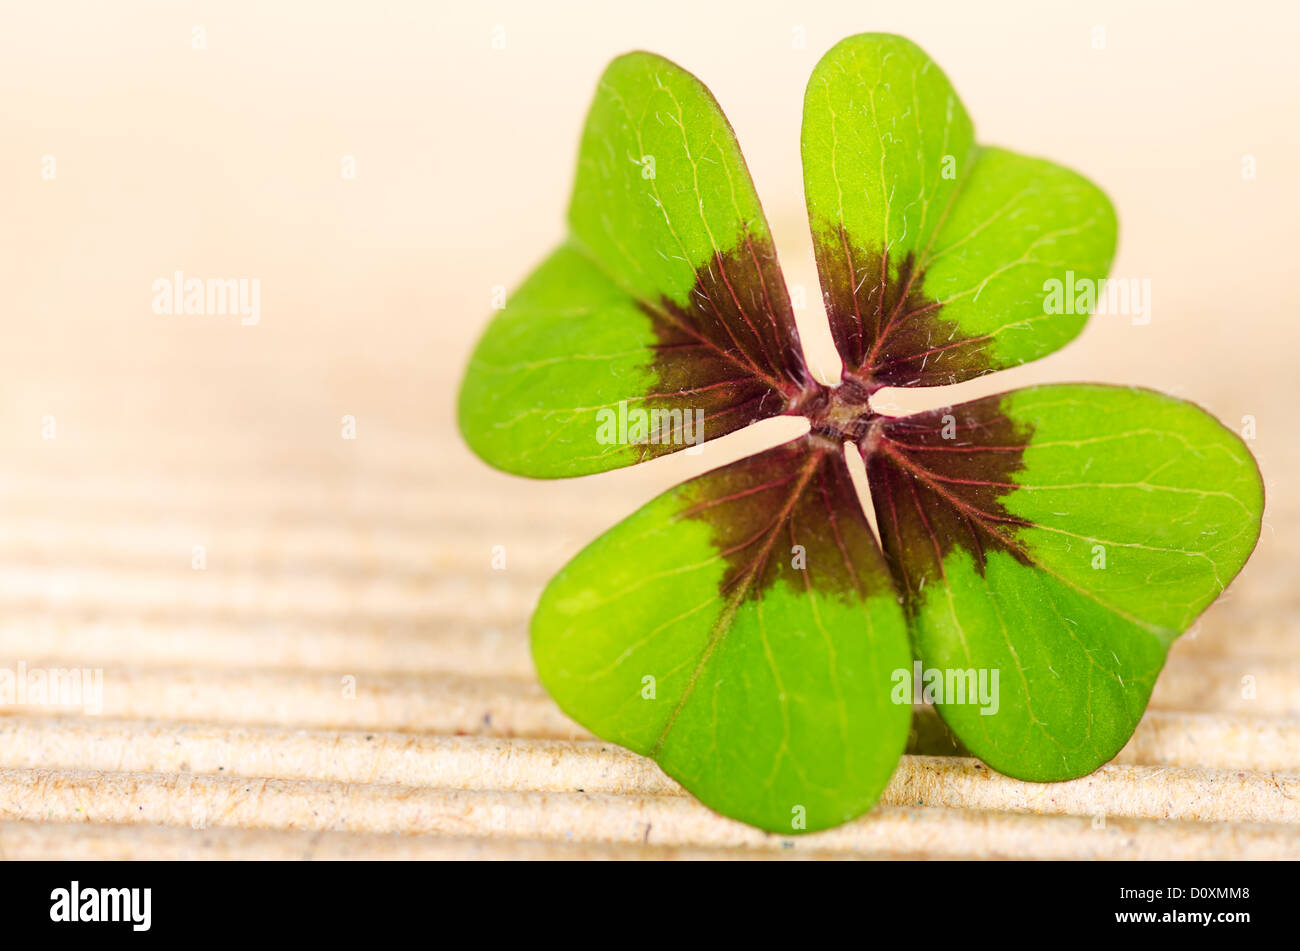 green four-leaved cloverleaf with copy space Stock Photo